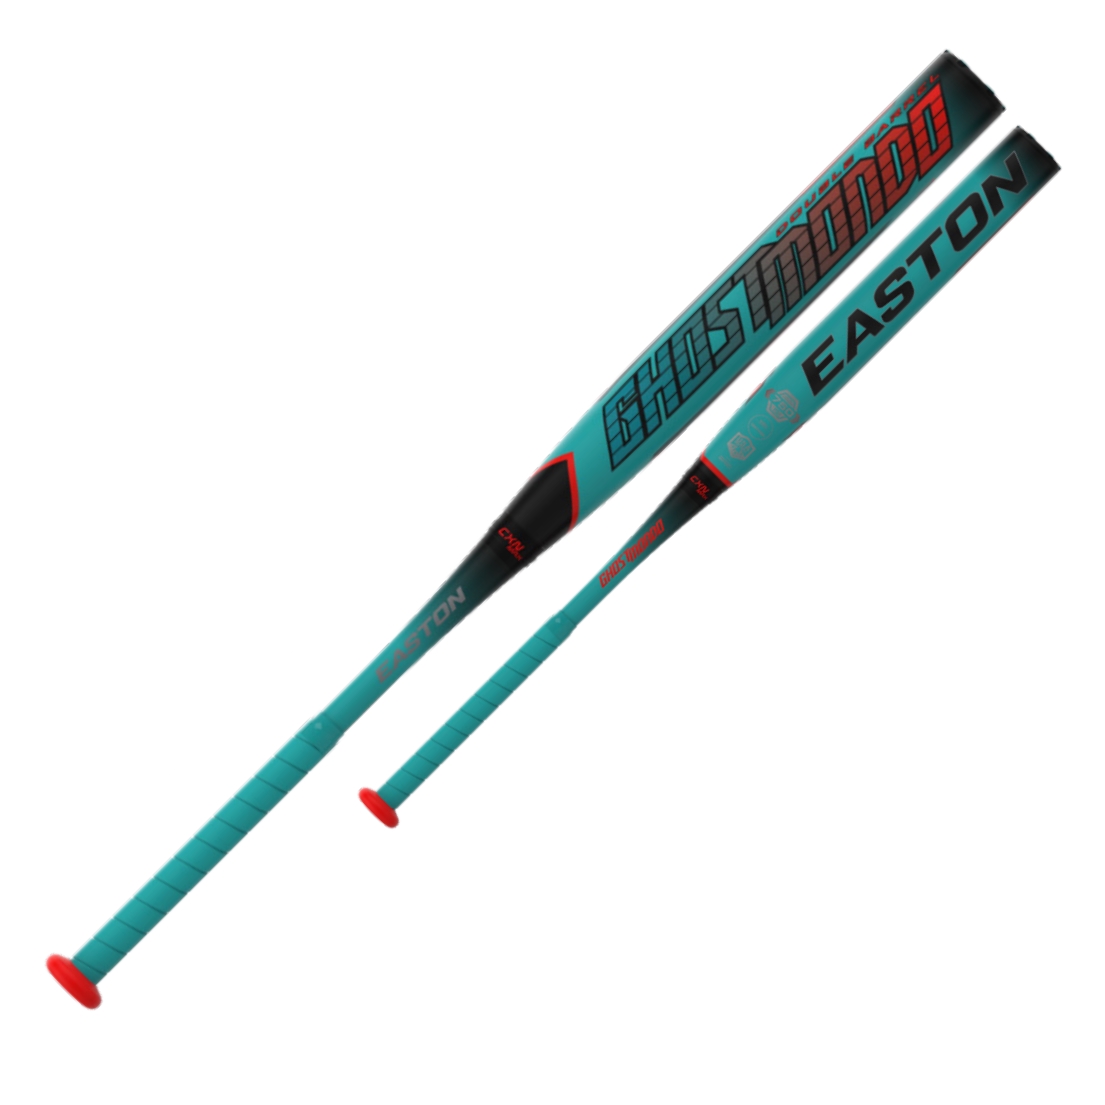 easton-ghostmondo-ext-12-5-load-usa-softball-bat-34-inch-27-oz SP22GHML-3427 Easton 628412361580 <p>Double Barrel Technology – Delivers soft barrel compression and hot performance